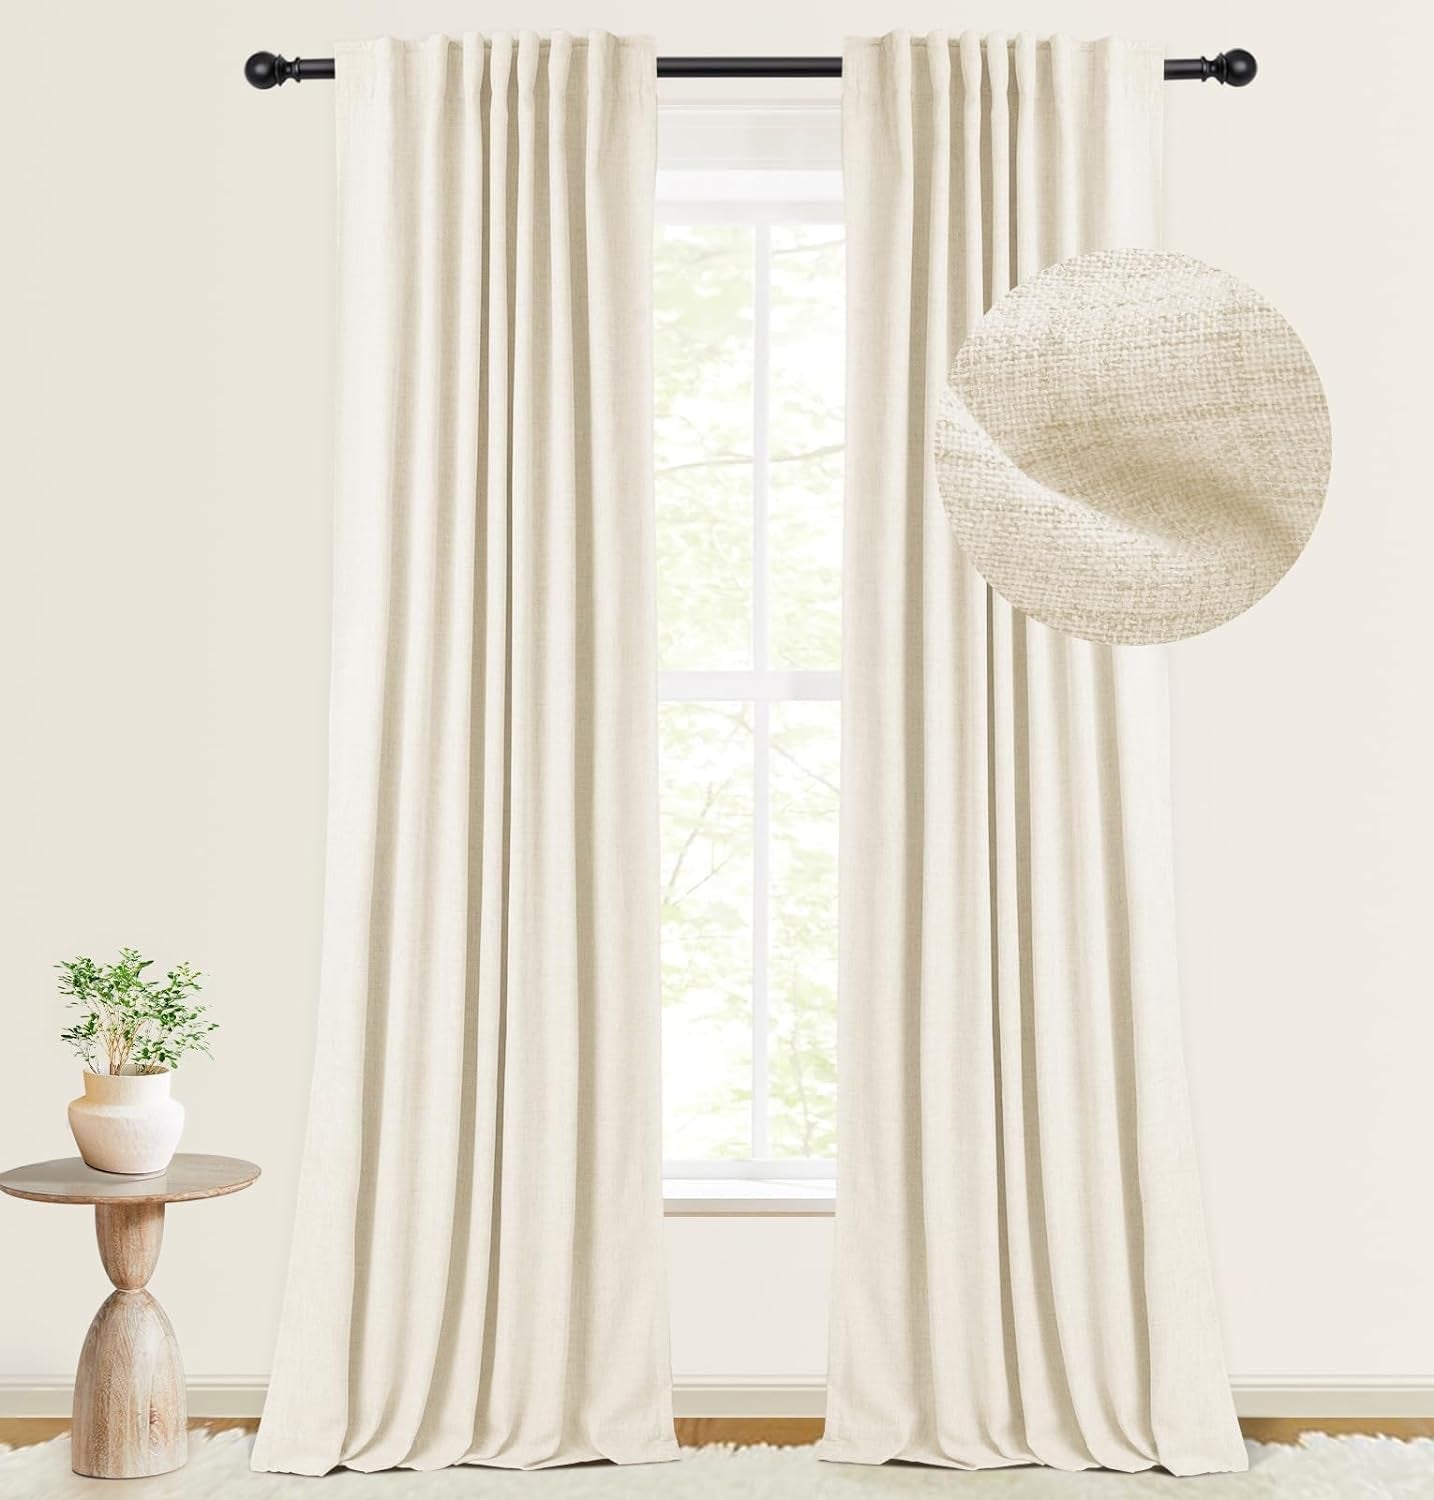 INOVADAY 100% Blackout Curtains 96 Inches Long 2 Panels Set, Thermal Insulated Linen Blackout Curtains for Bedroom, Back Tab/Rod Pocket Curtains & Drapes for Living Room - Beige, W50 X L96  INOVADAY 05 Light Cream 50''W X 90''L 